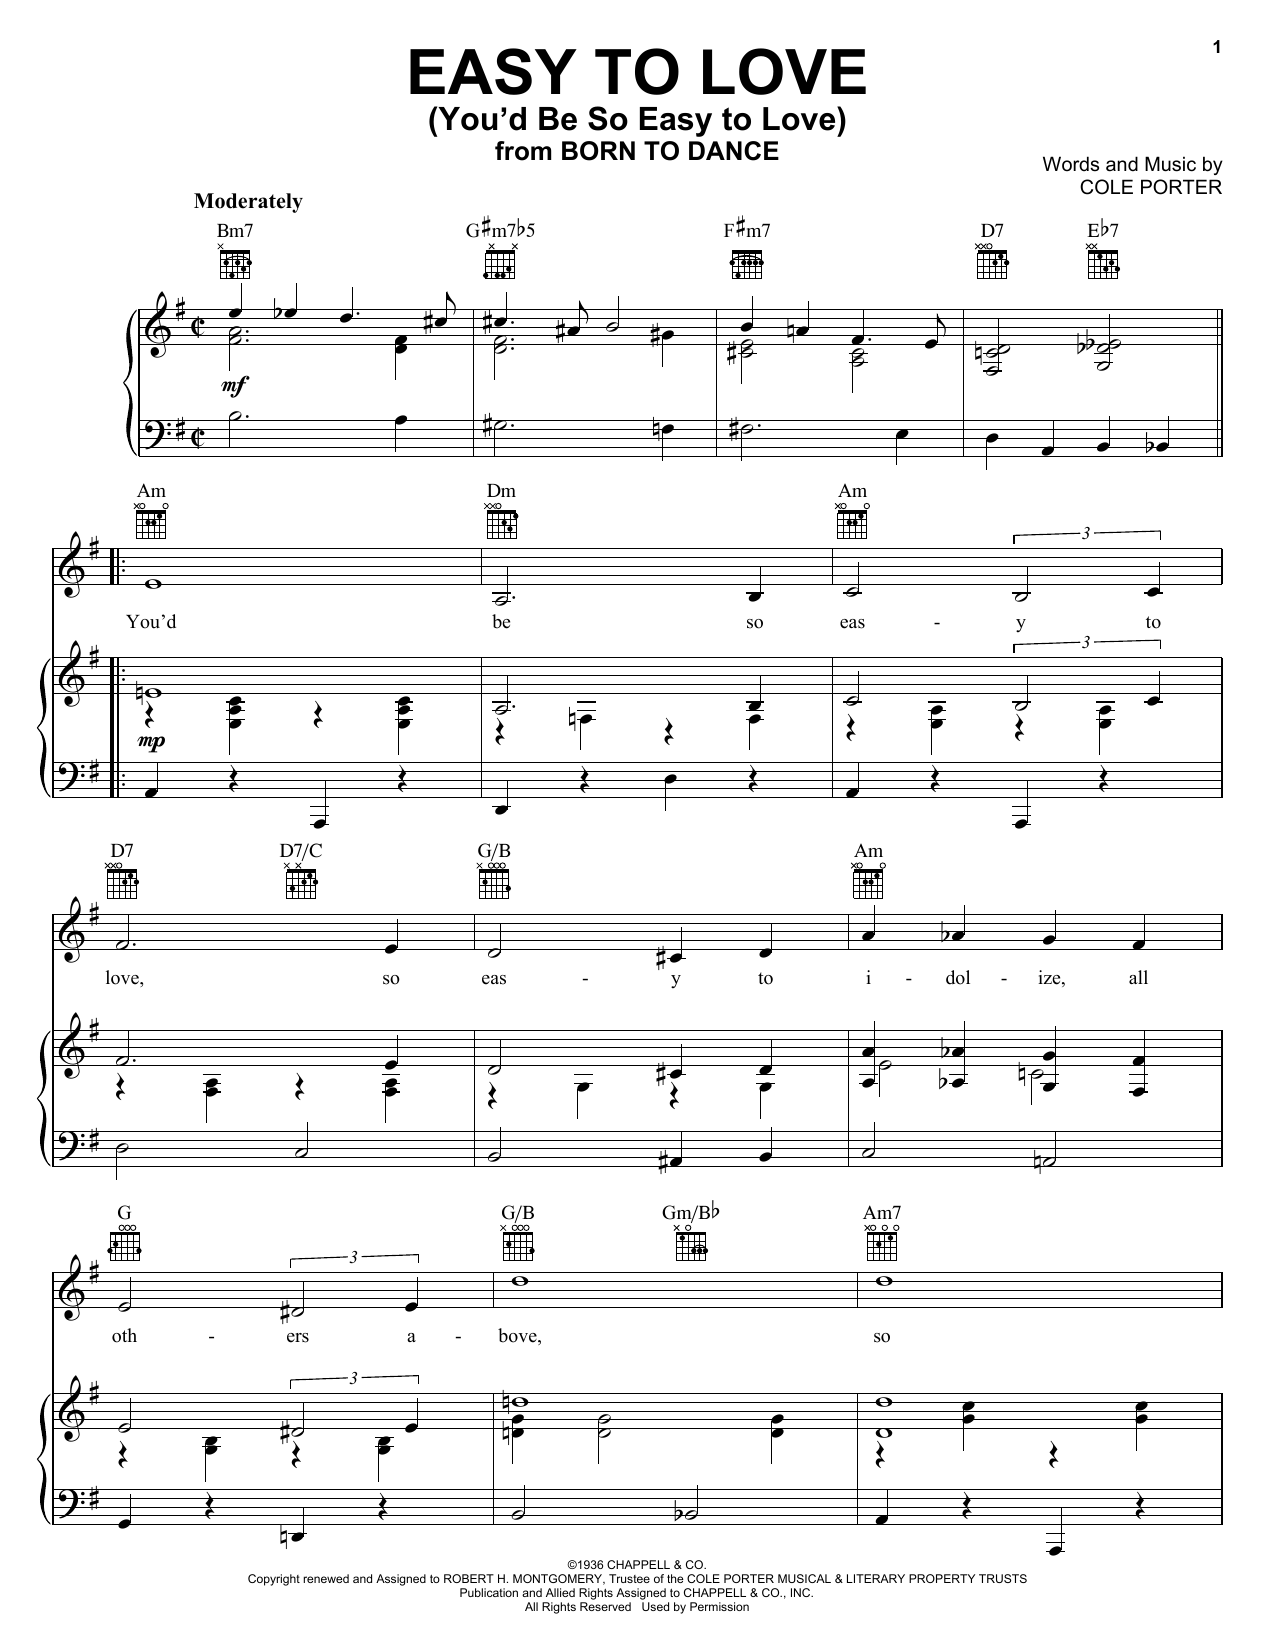 Download Frank Sinatra Easy To Love (You'd Be So Easy To Love) Sheet Music